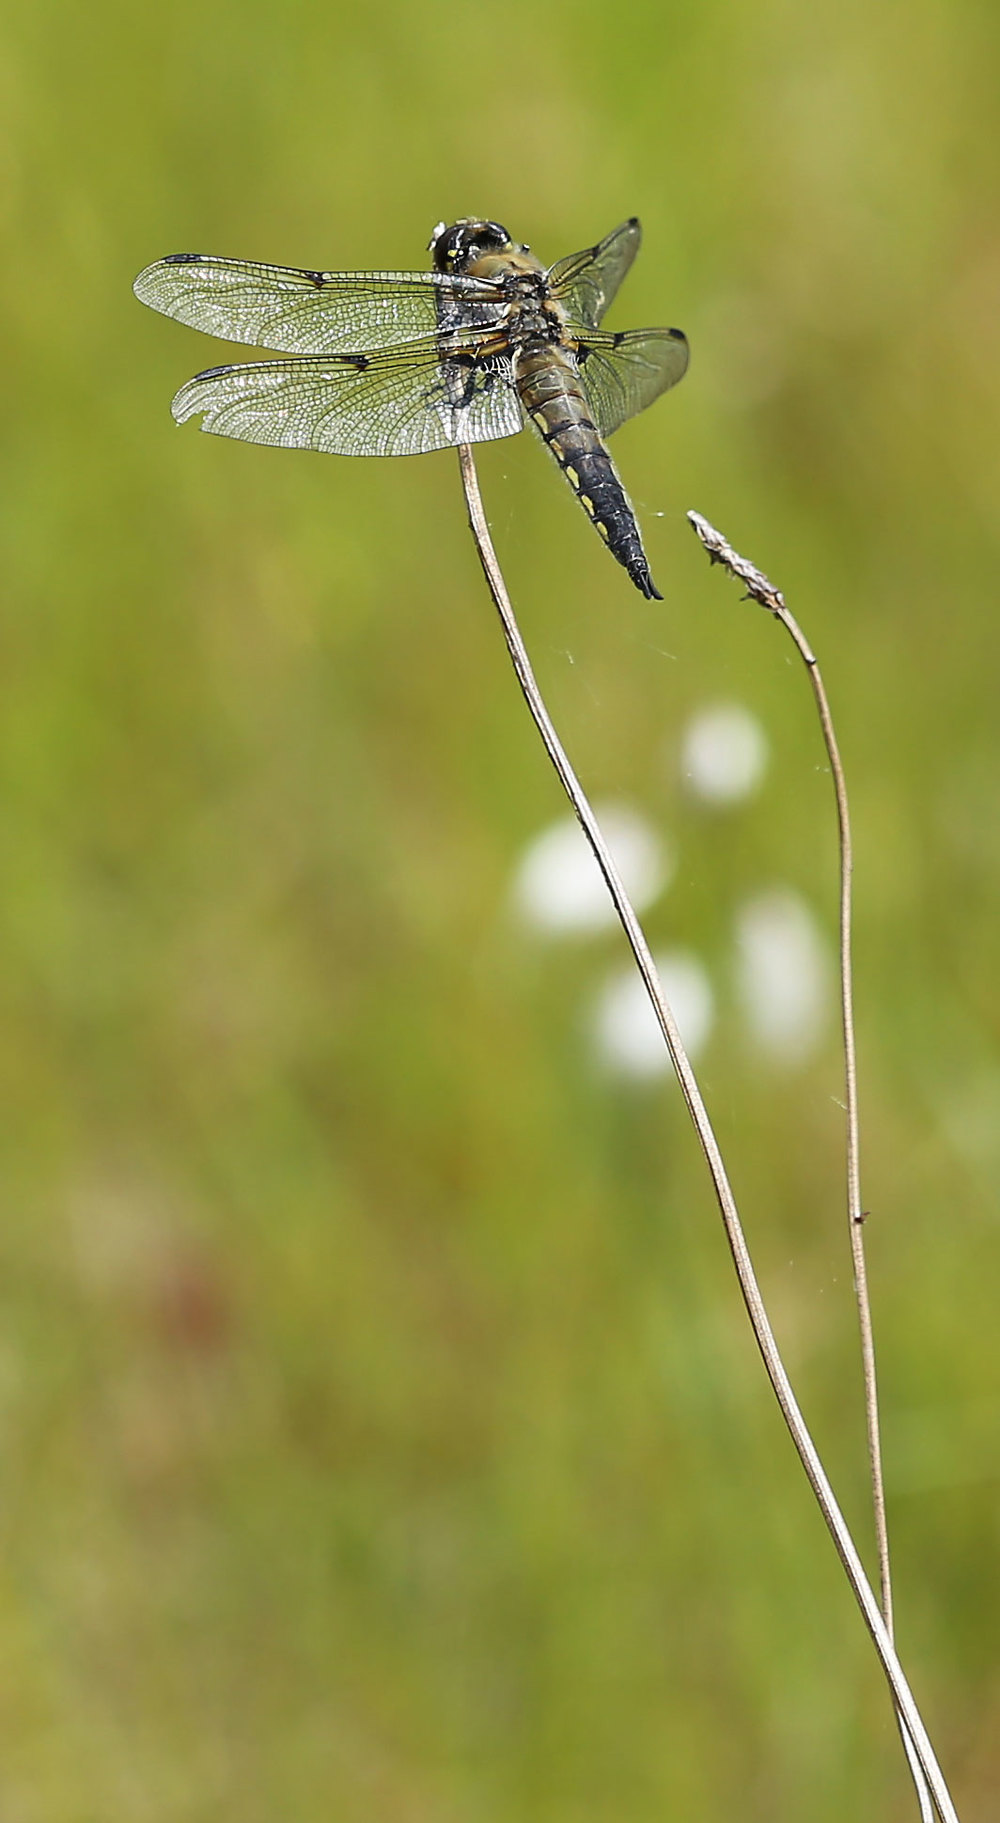  Four-spotted skimmer on an old grass stalk. &nbsp; 